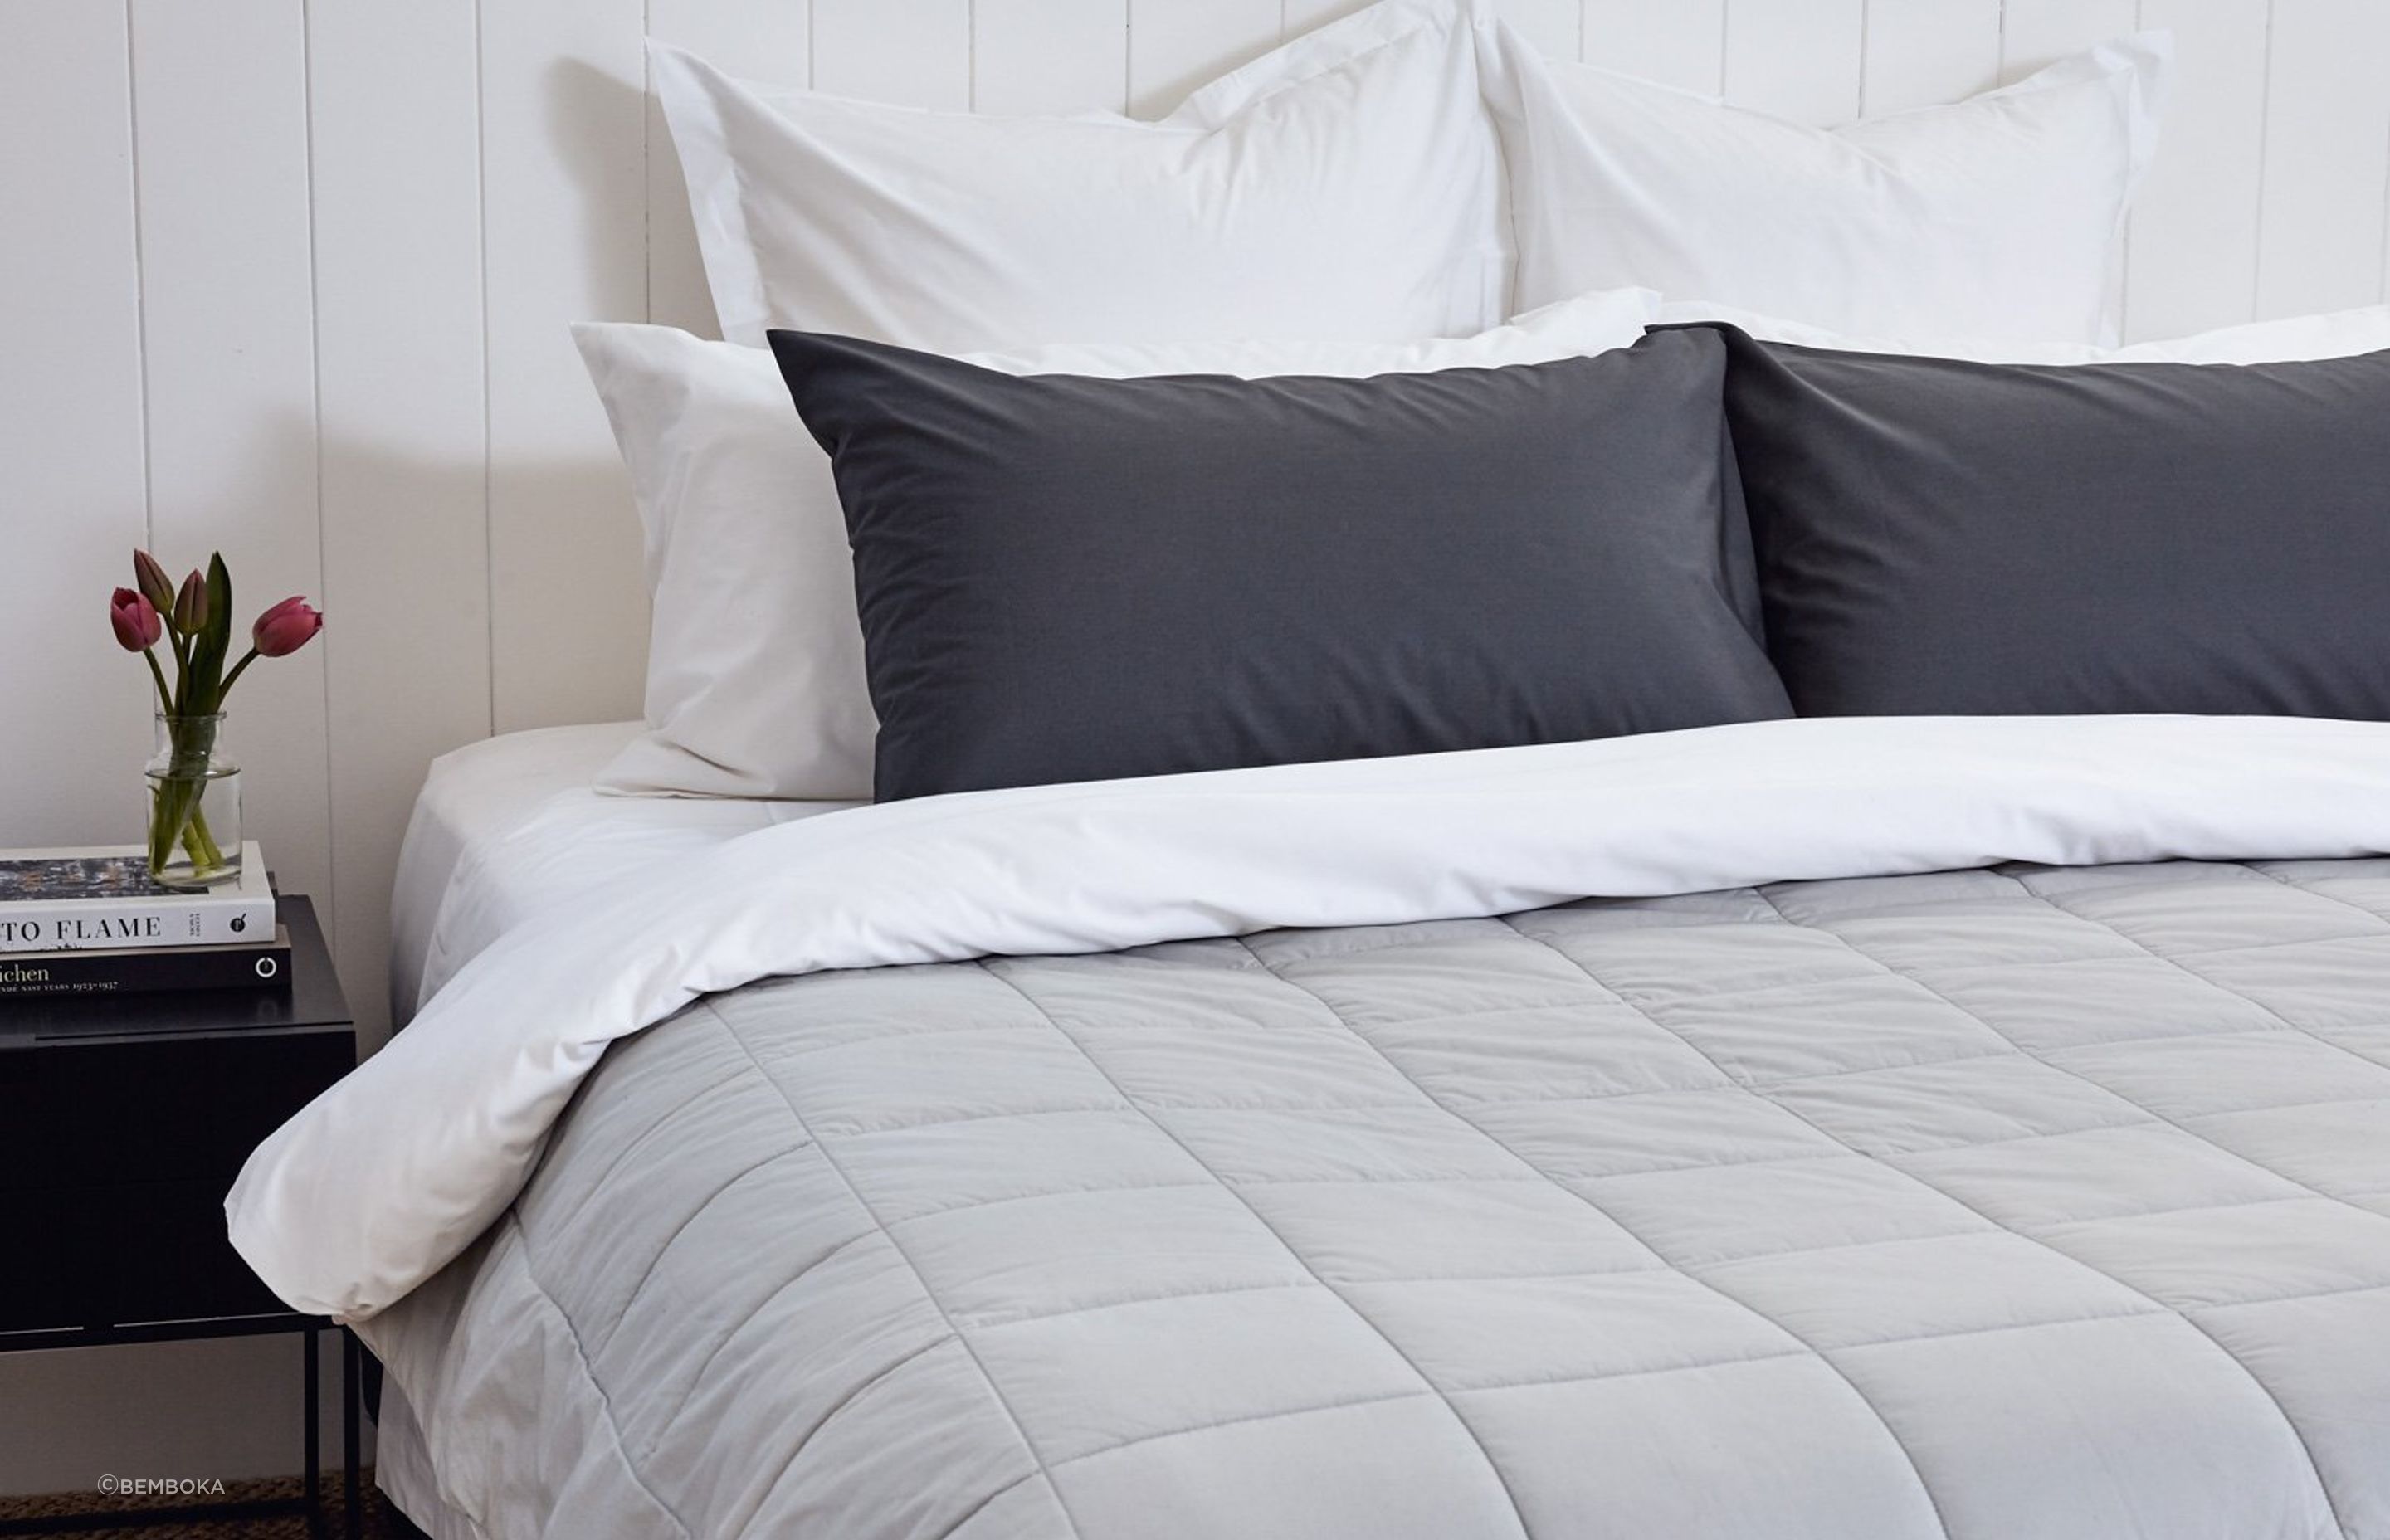 Fitted sheets help protect a mattress from wear and tear. Featured product: Pure Cotton King Fitted Sheet